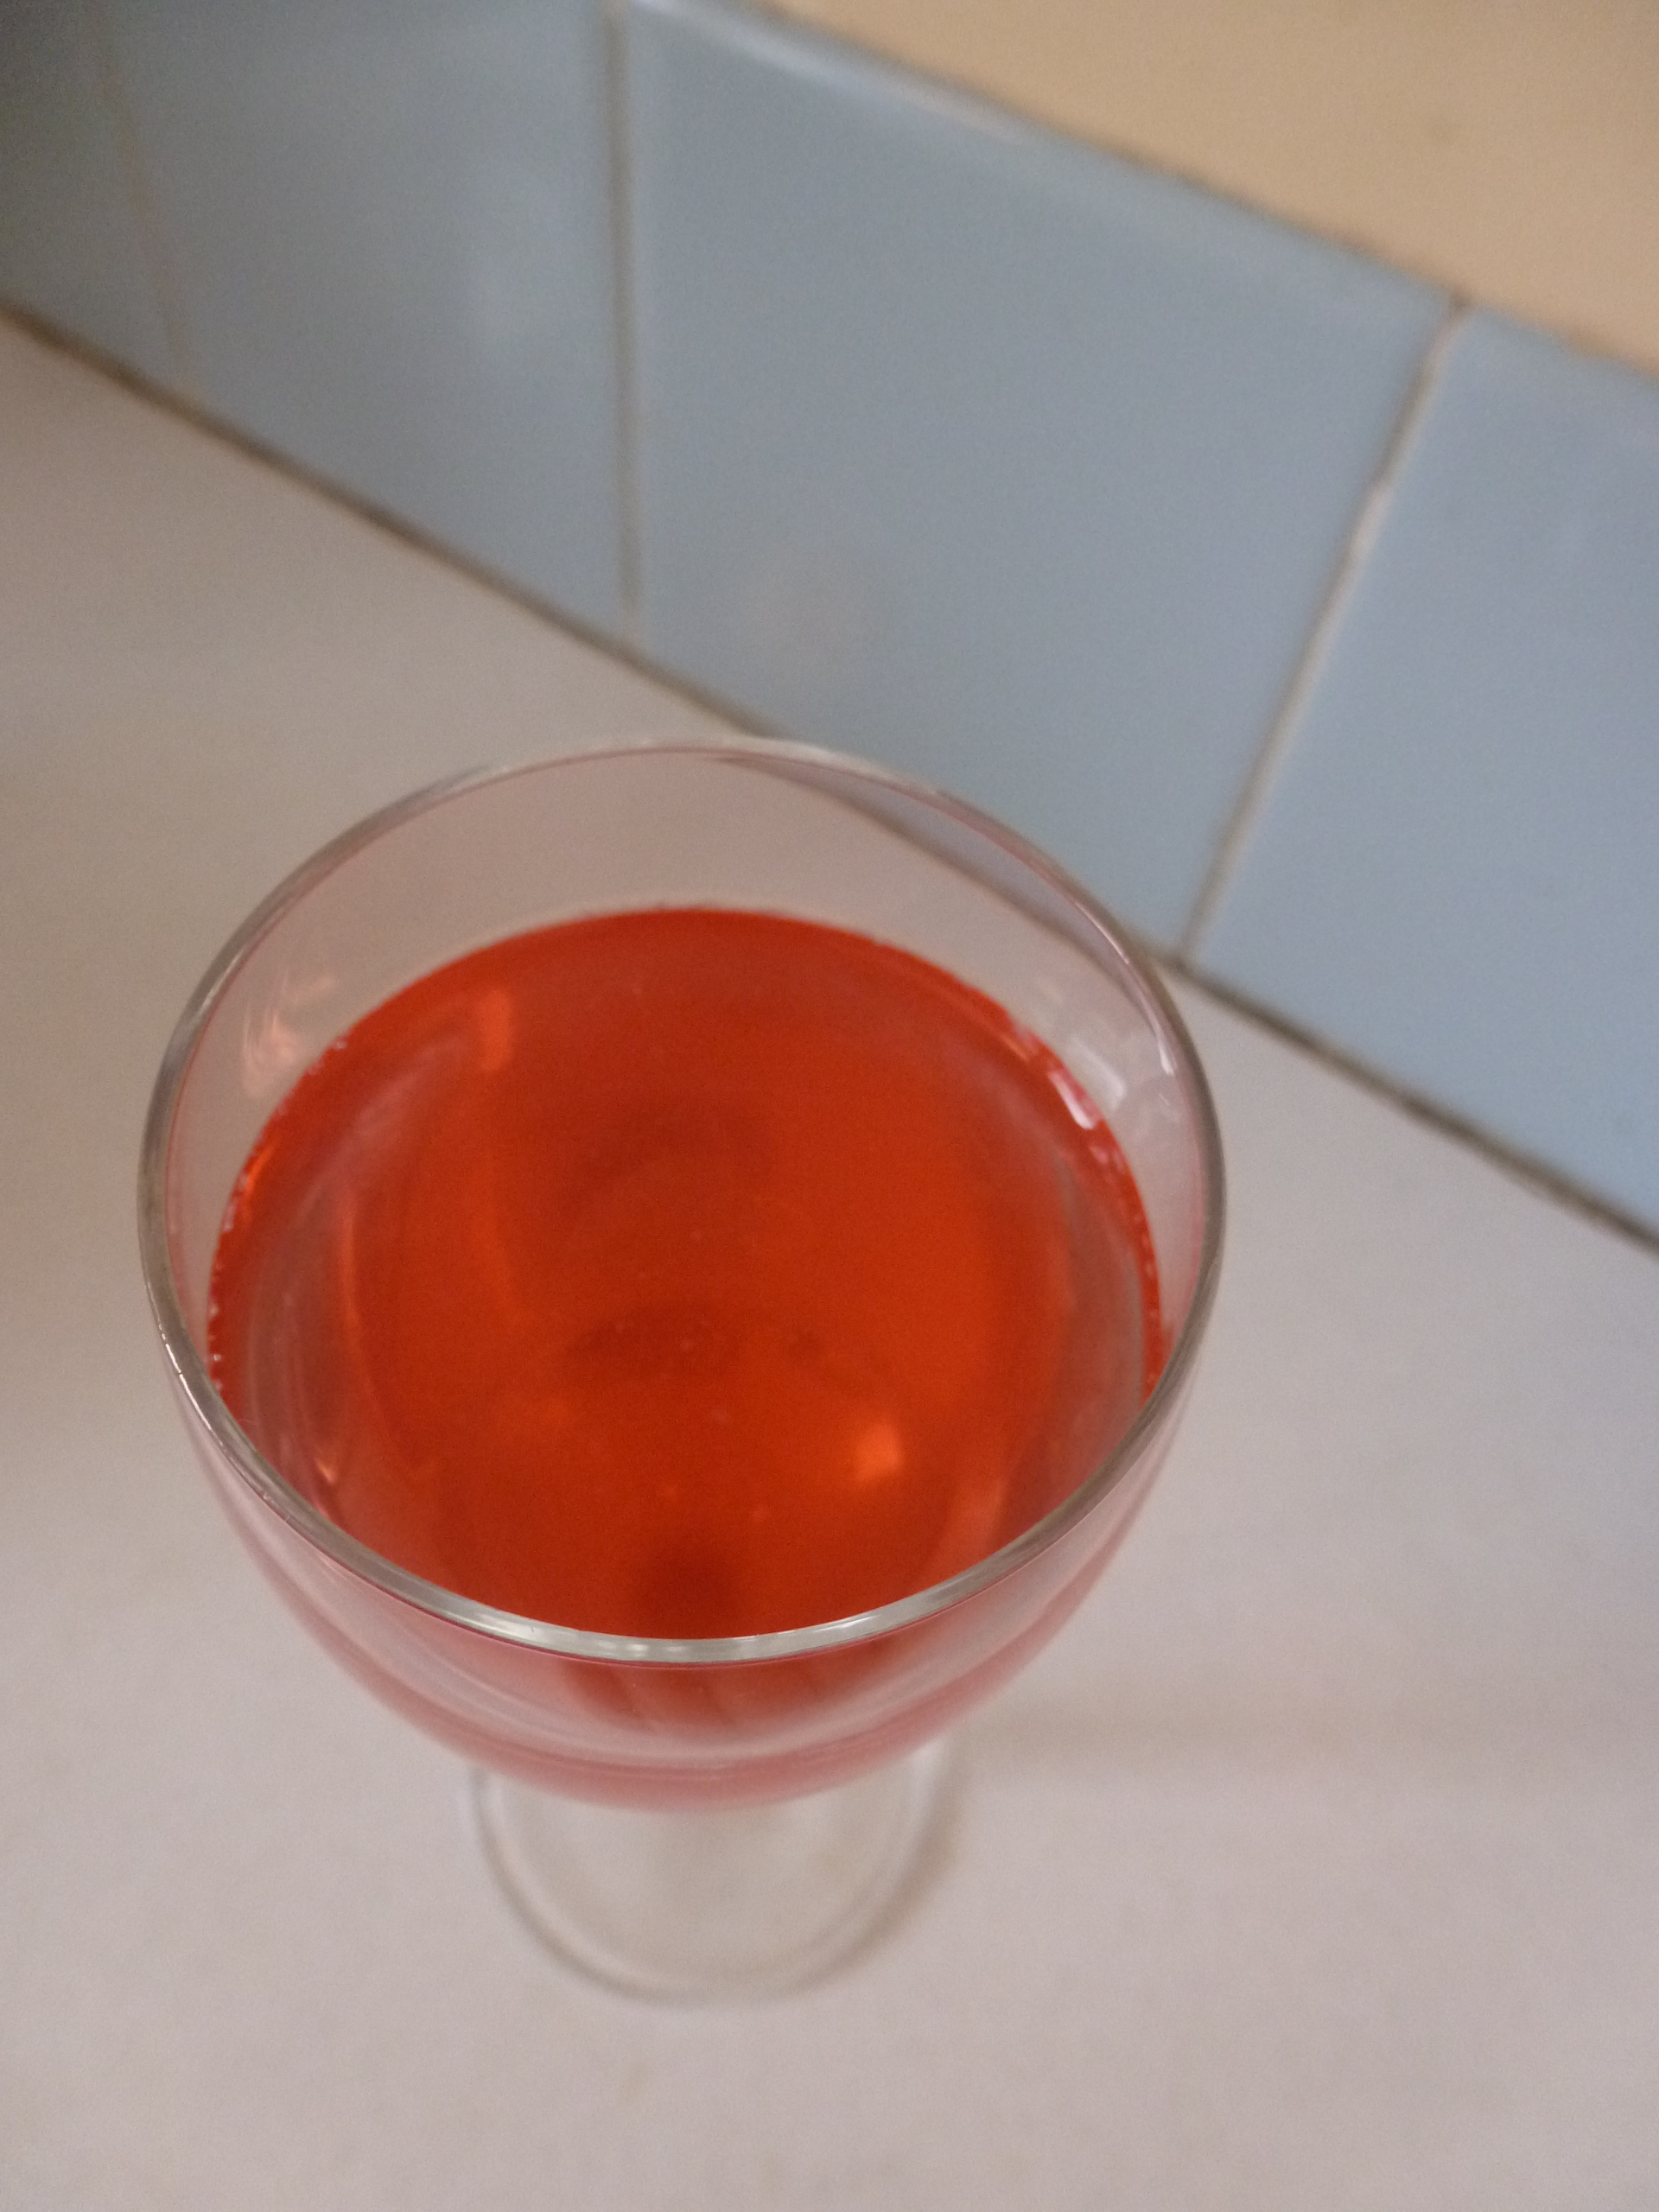 A glass of rhubarb water